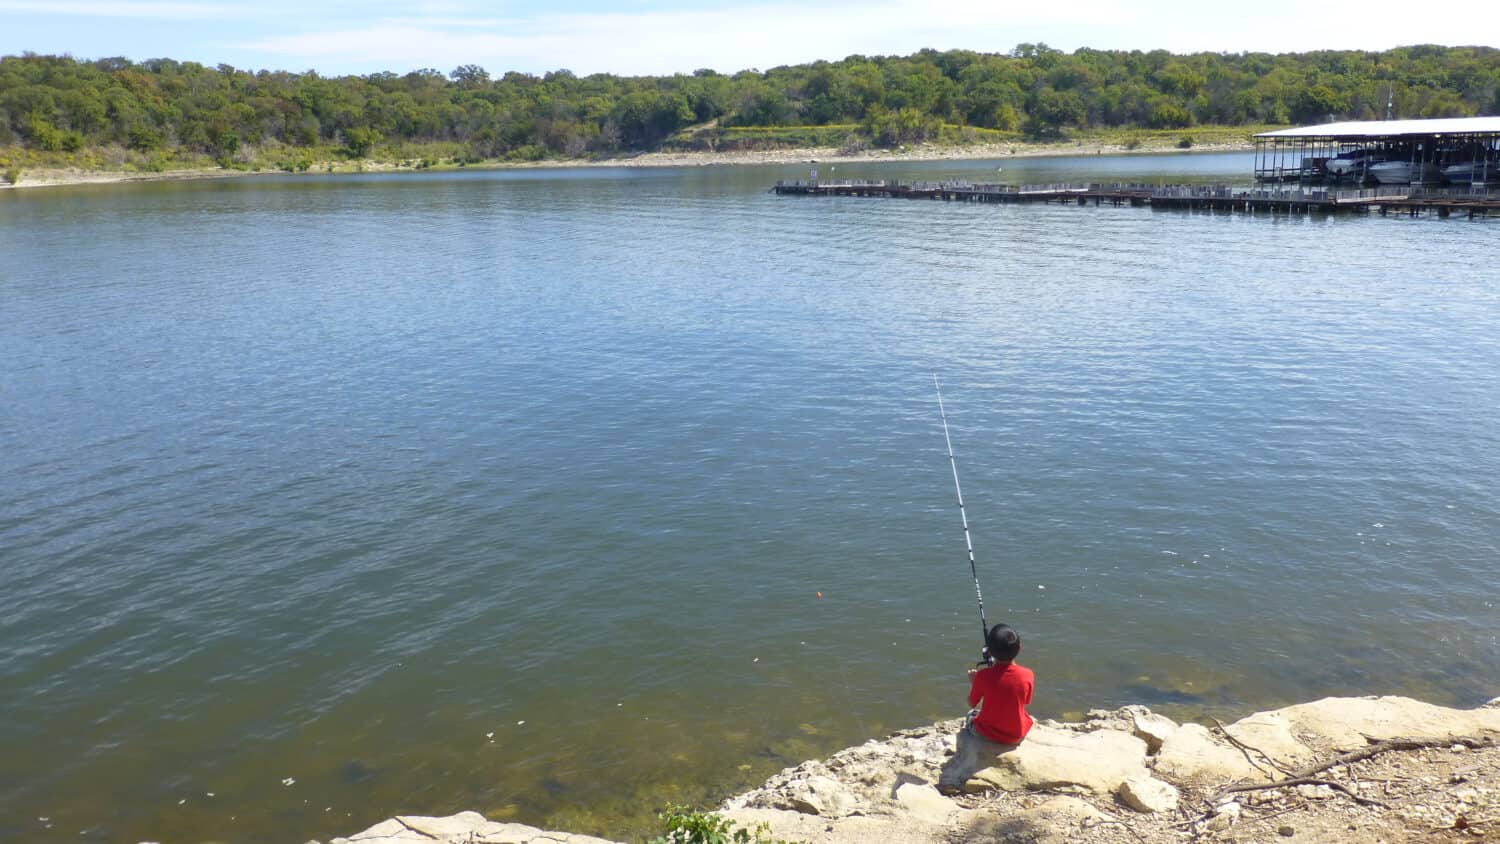 Lake Texoma in Texas is where the largest blue catfish ever was caught in the state!